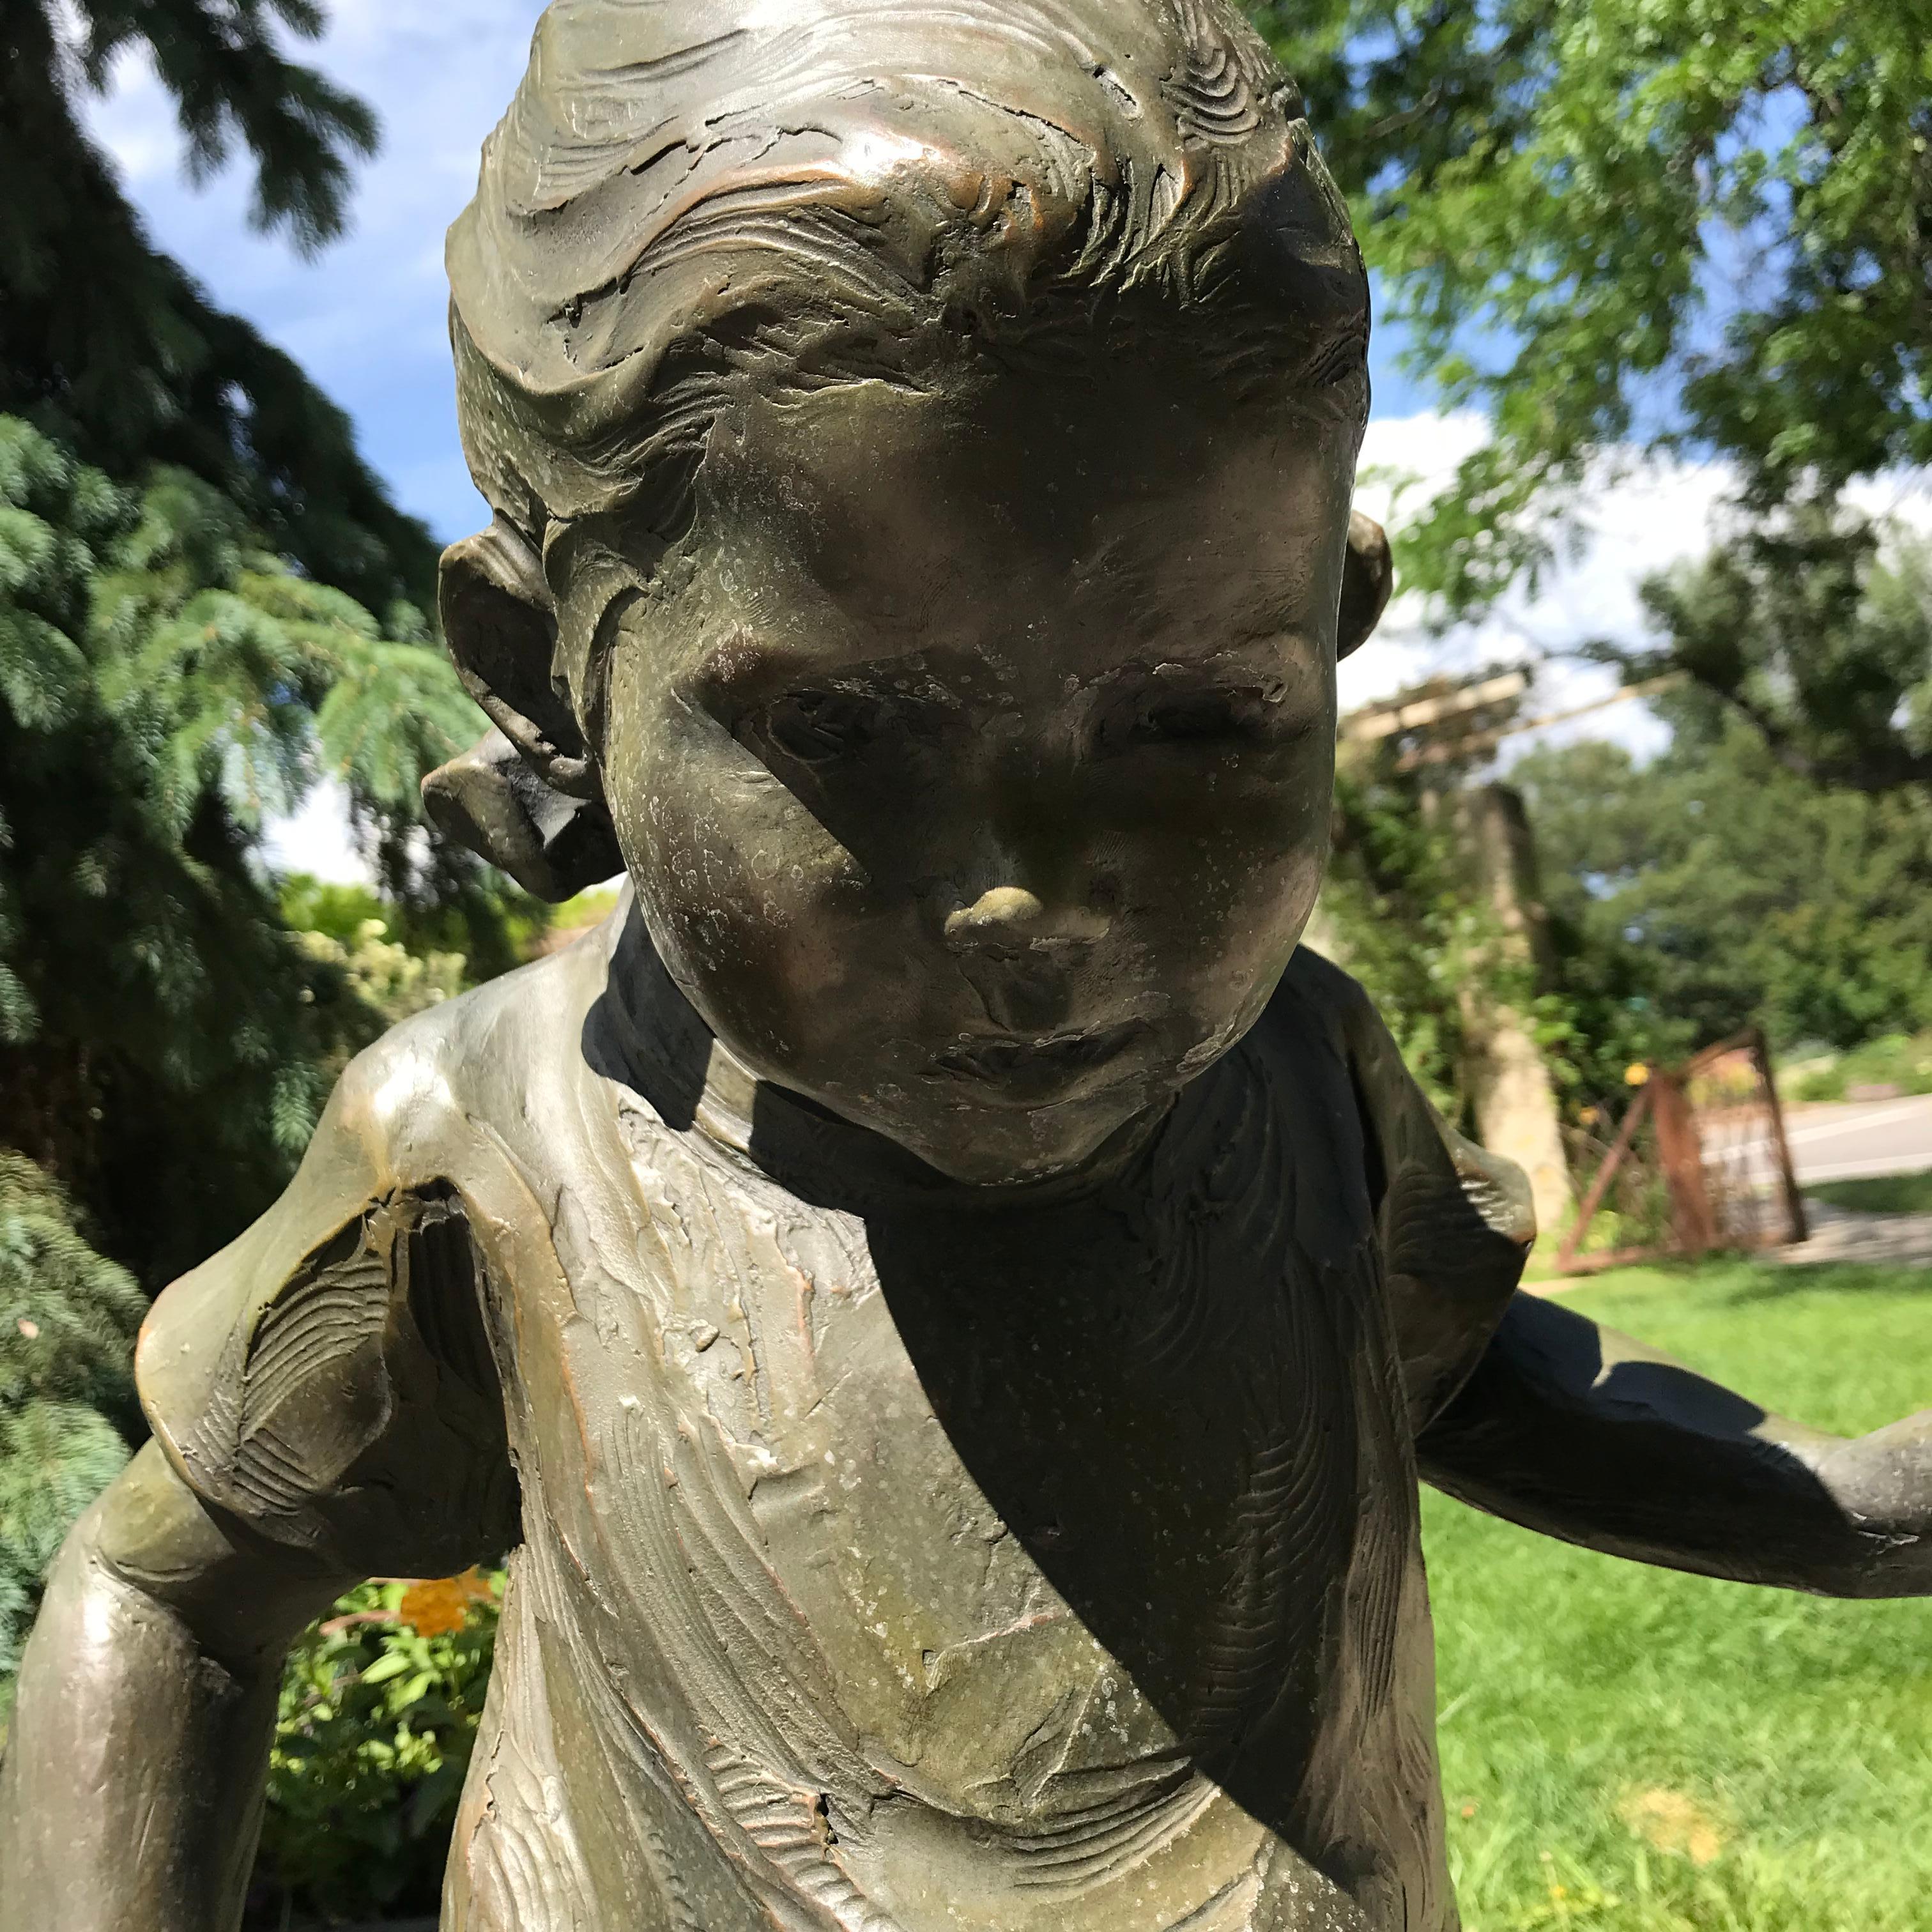 Julie is a figurative bronze sculpture depicting a young girl carefully balancing her way across a narrow path. Finished with a greenish-hued patina, this sculpture fits any garden or entry in its playful sophistication. The child is 28